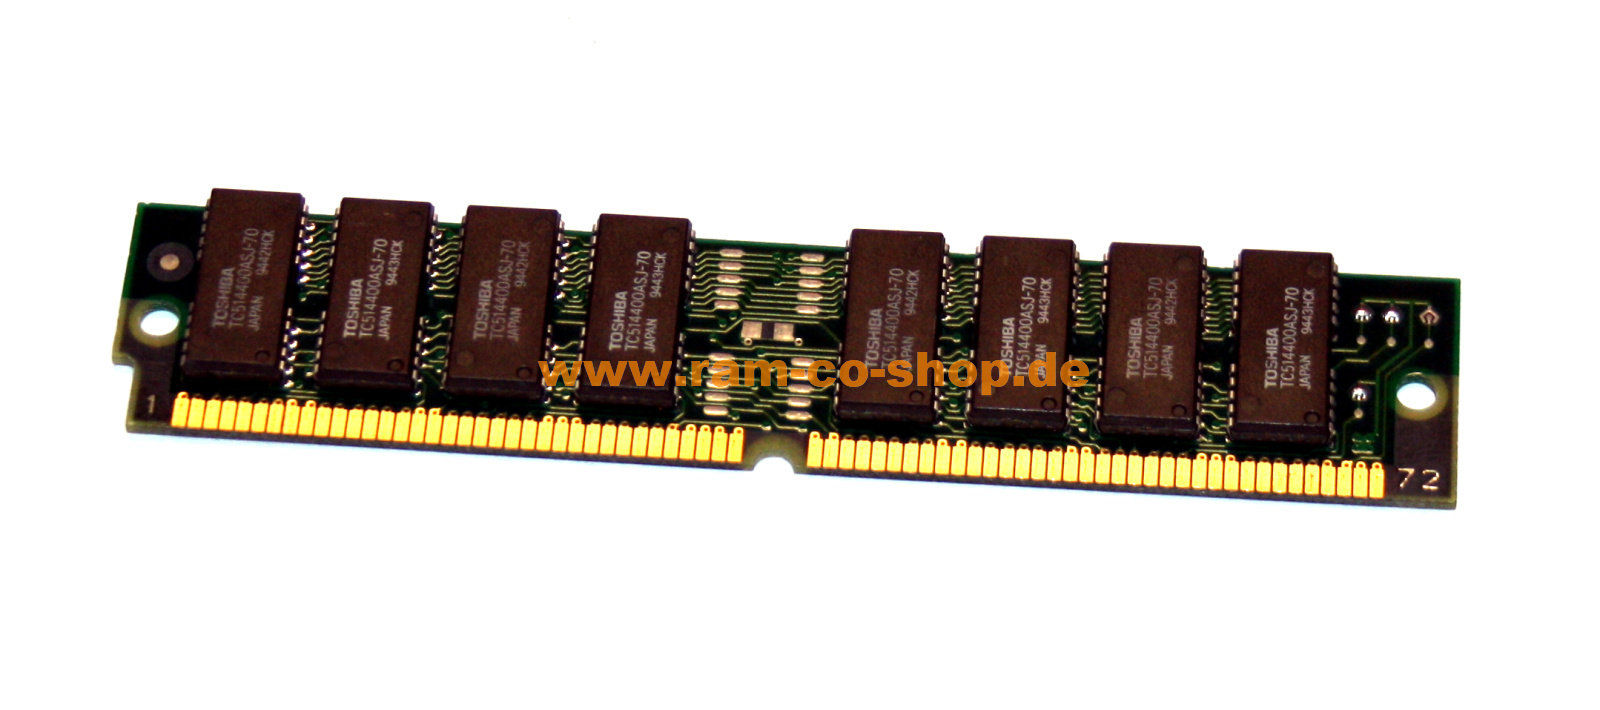 4 MB FPM-RAM non-Parity 70 ns 72-pin PS/2 'Chips: 8x Toshiba 